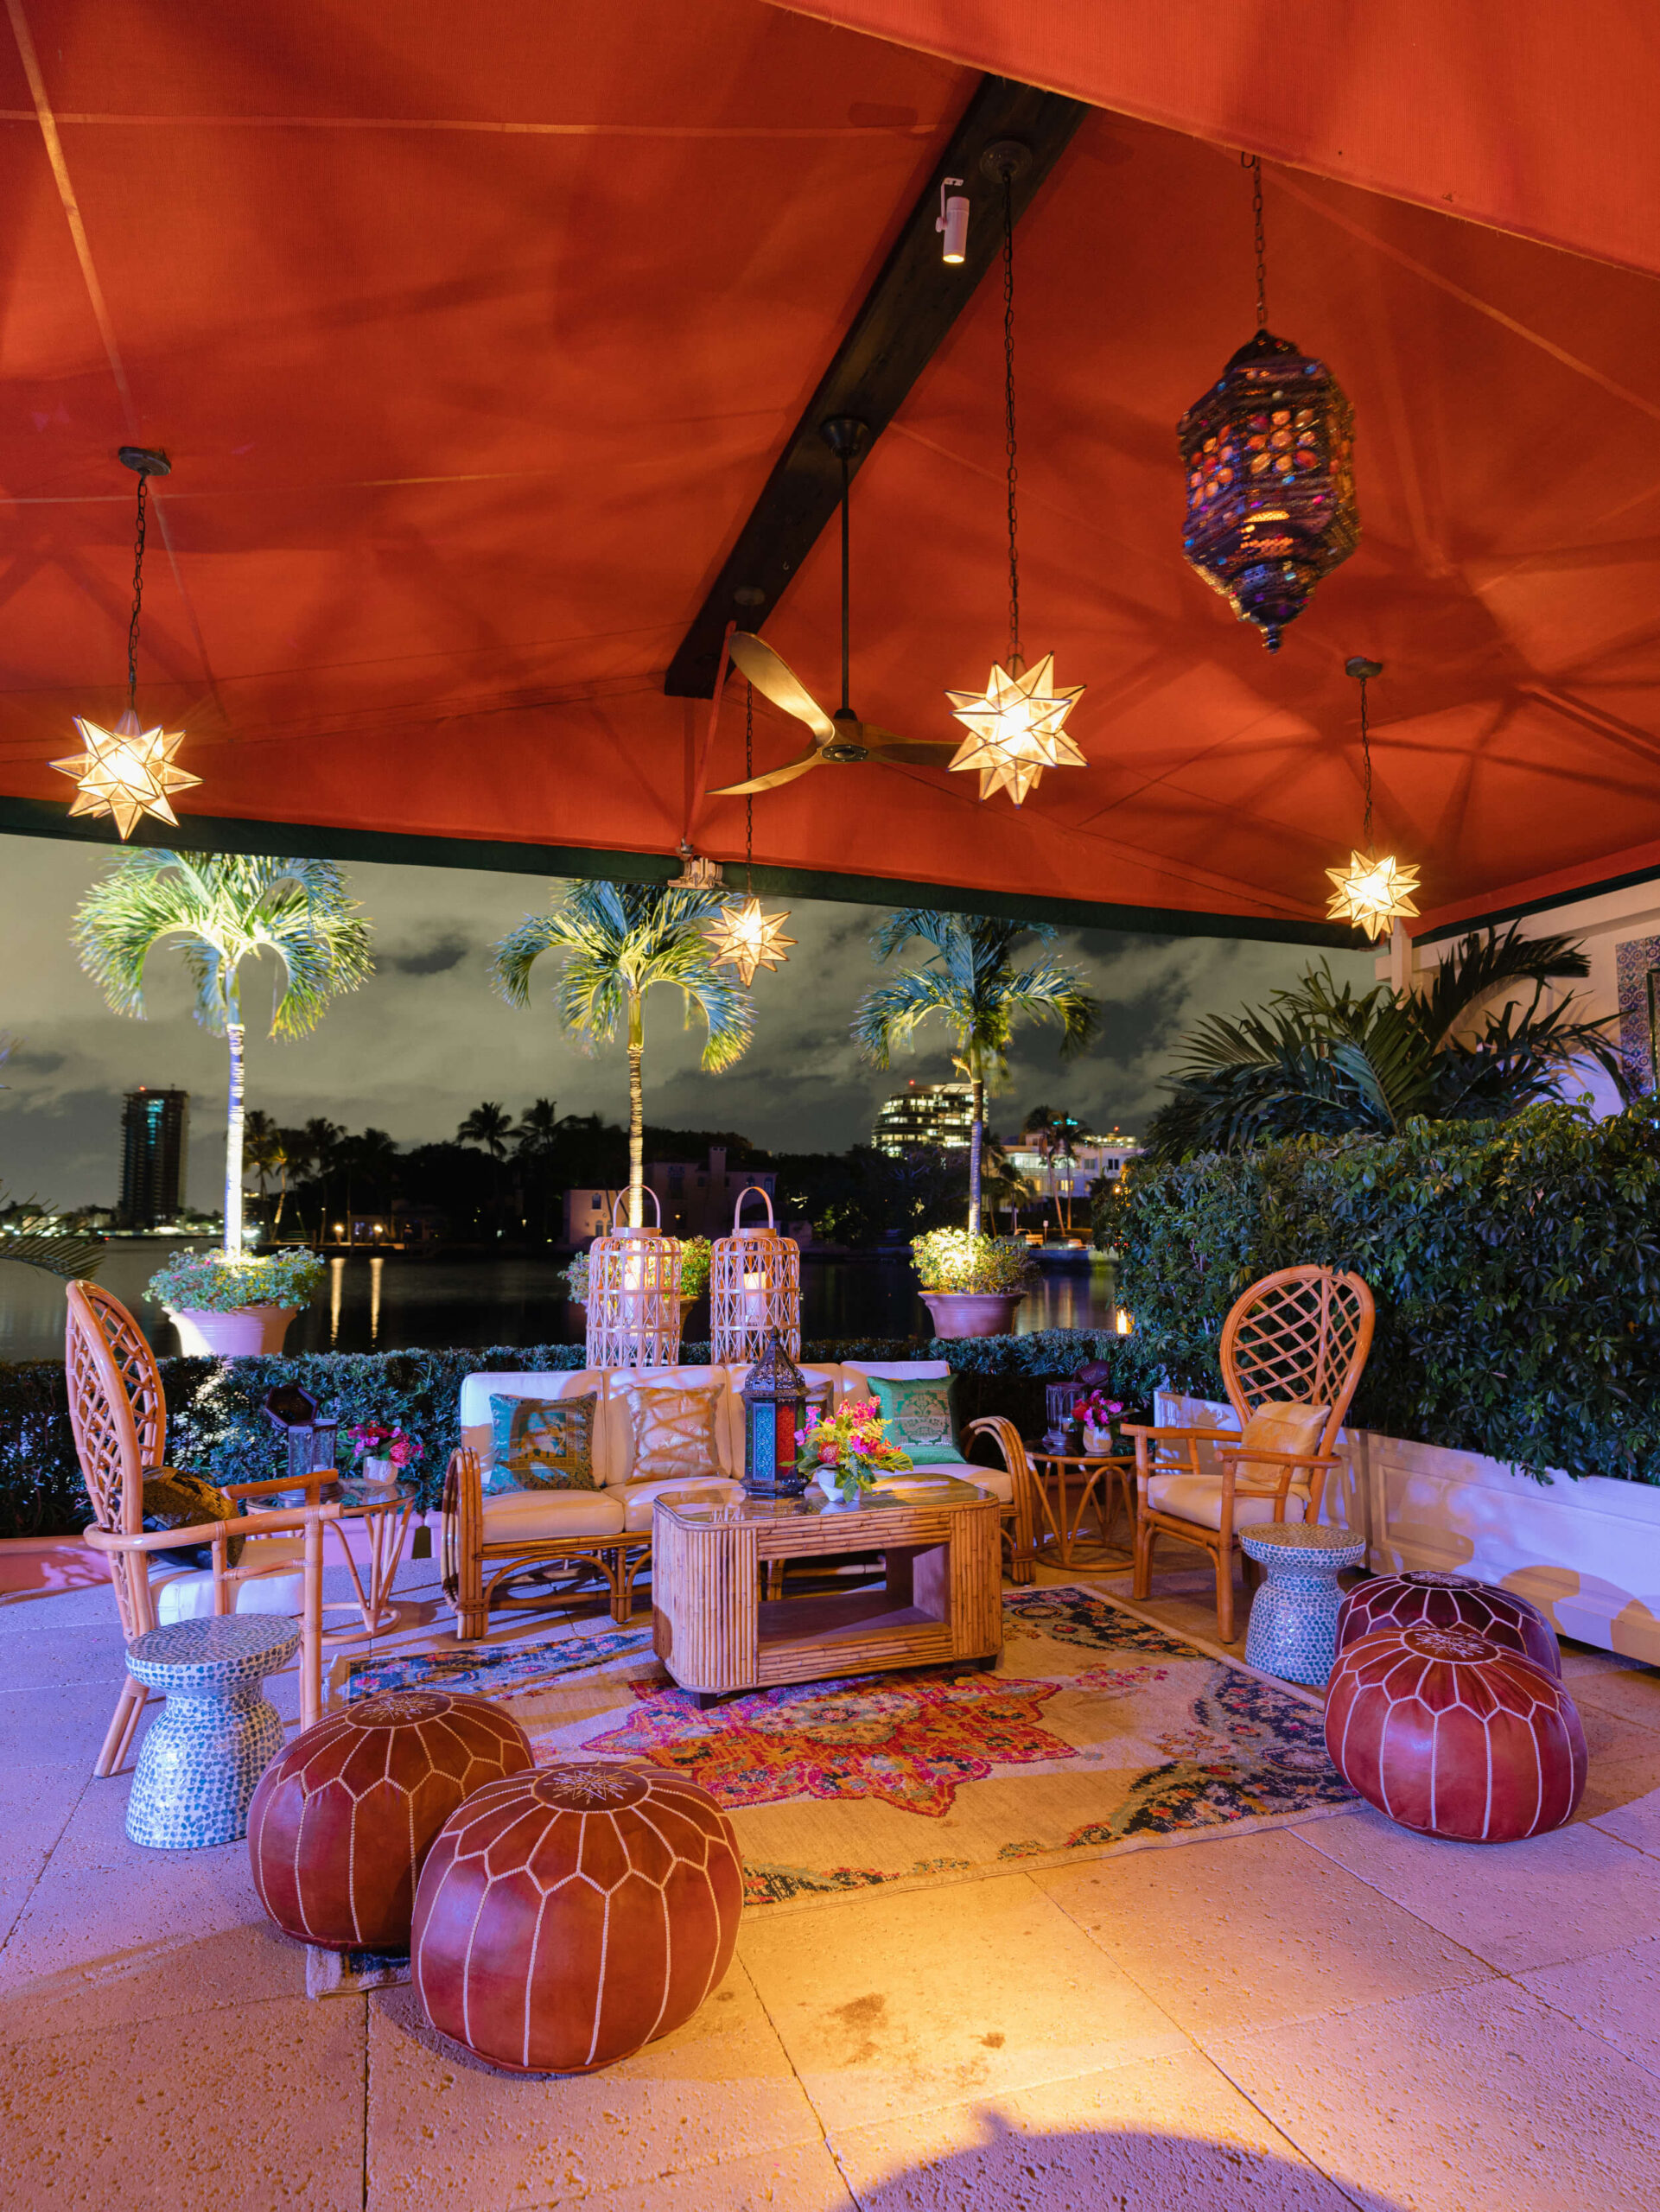 Comfortable seating area, colorful lights and plush floor cushions